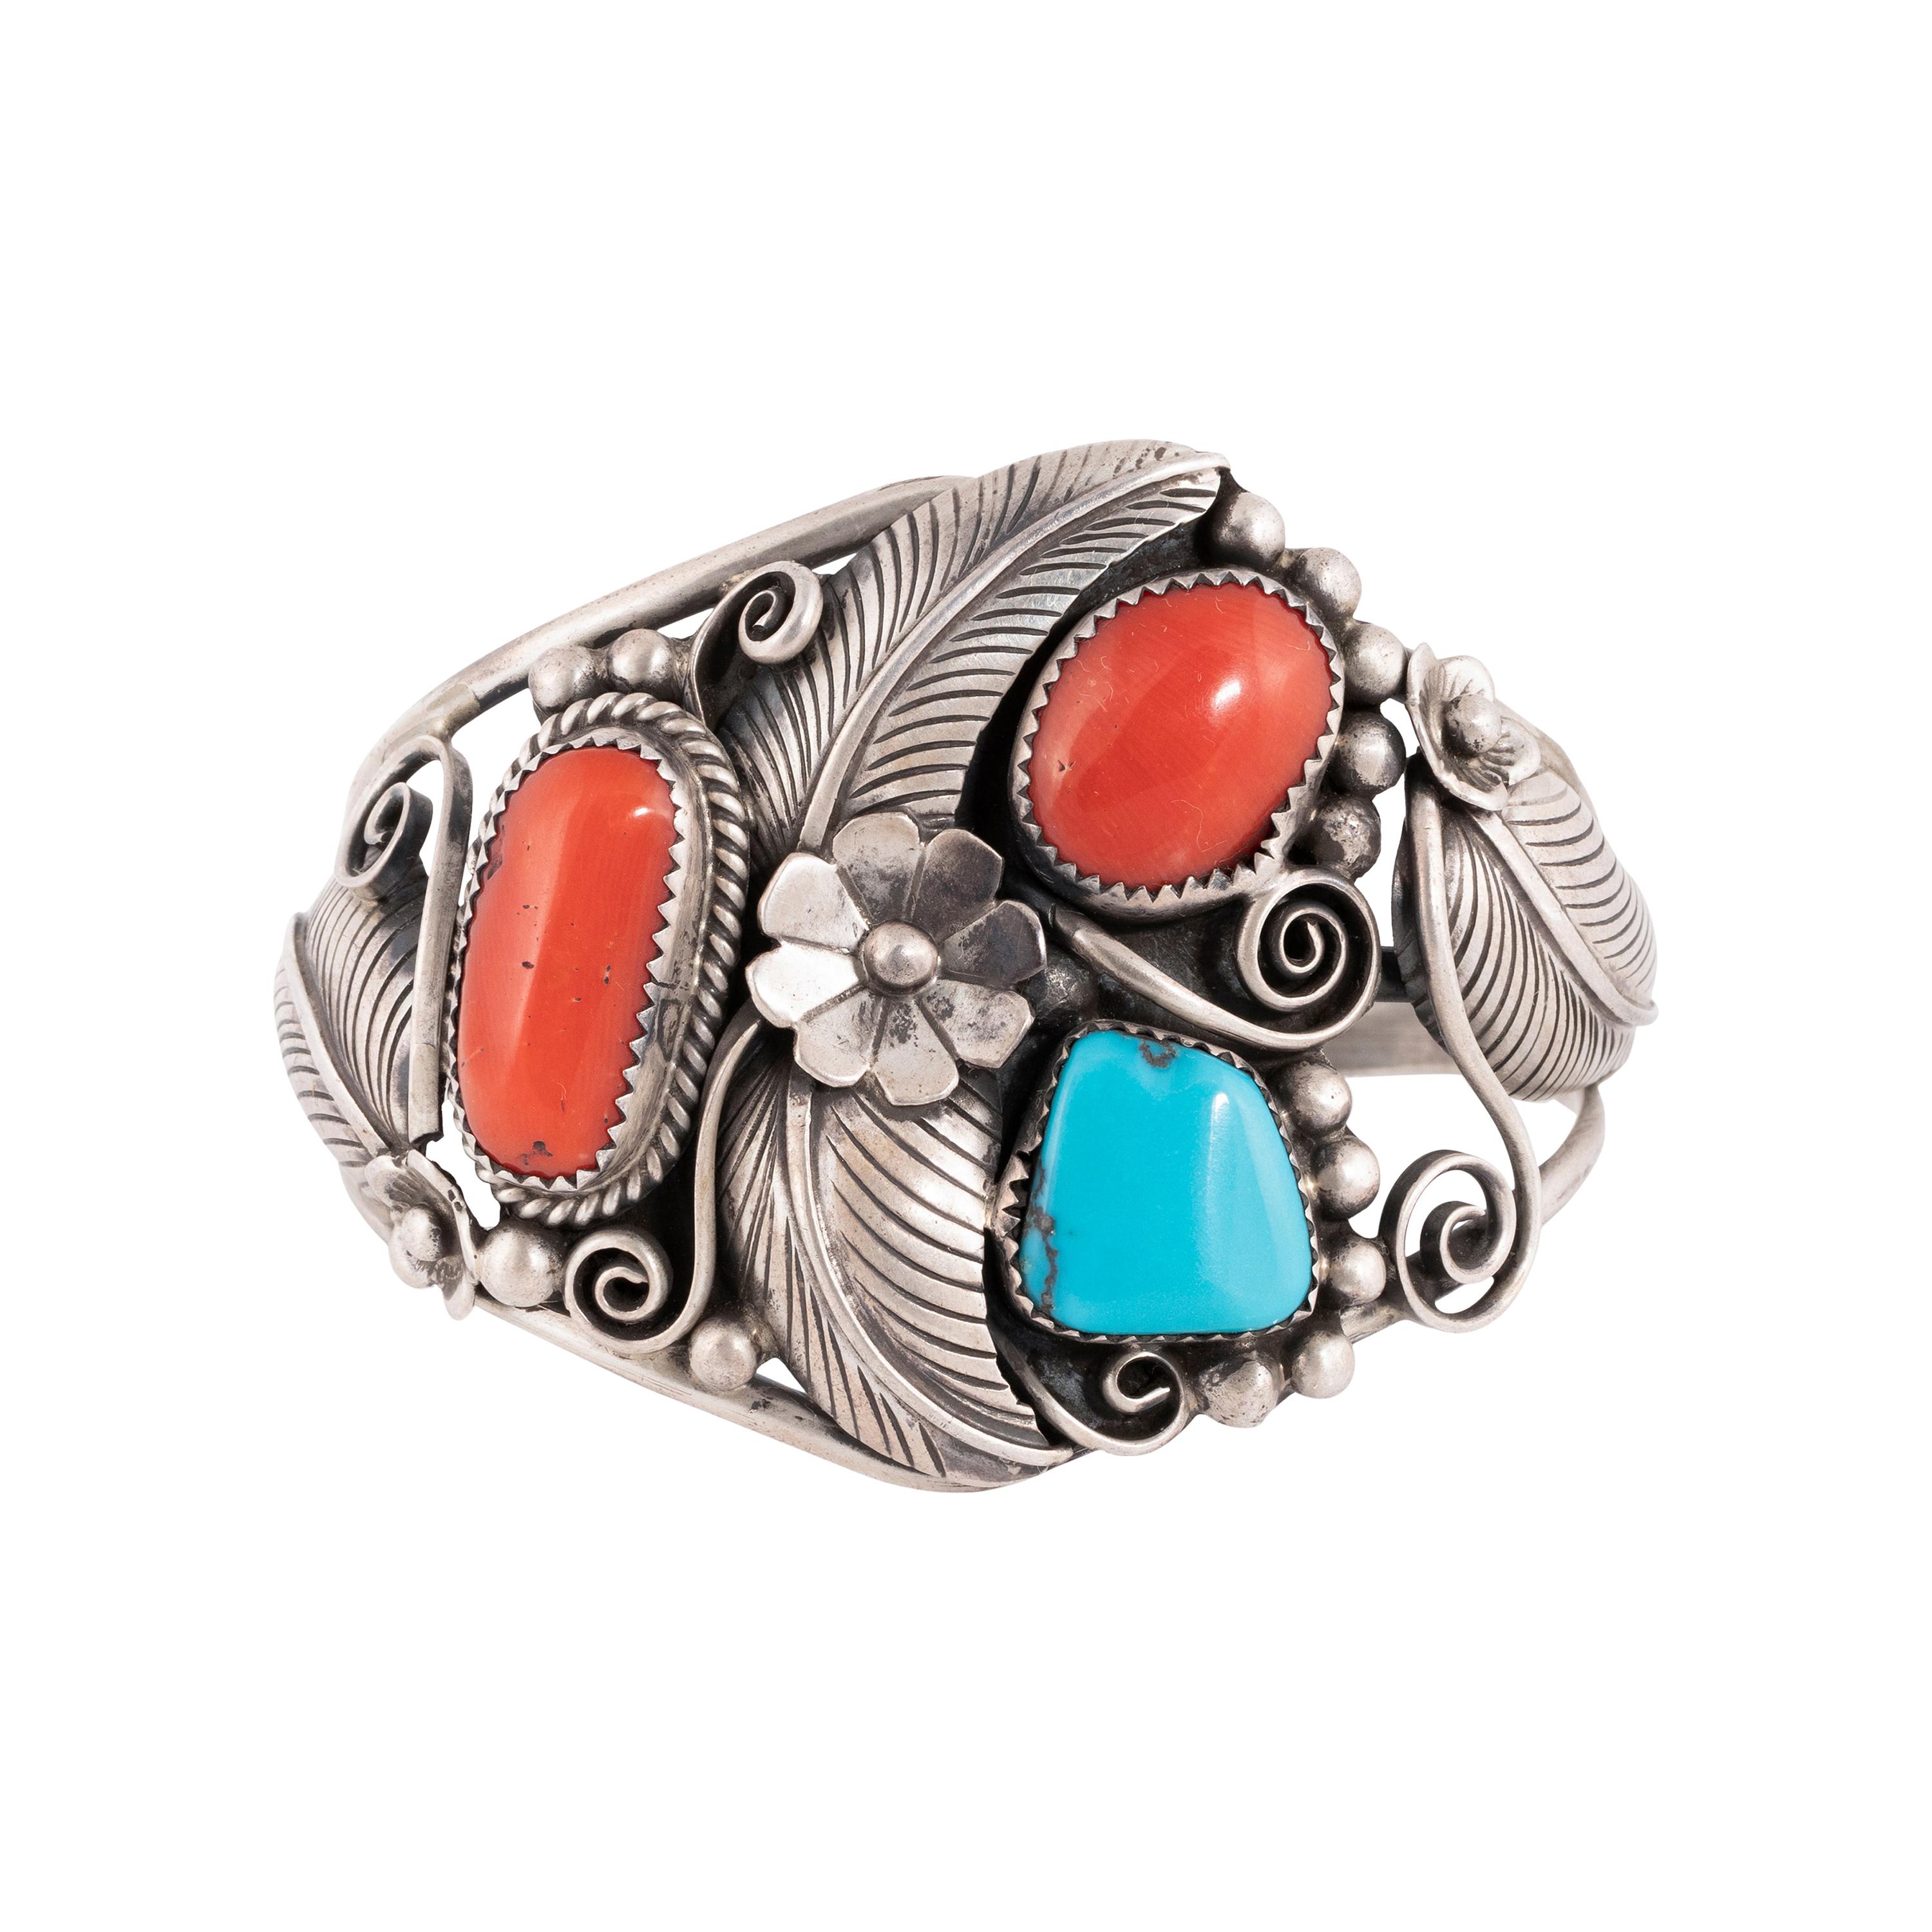 Navajo Sleeping Beauty Turquoise and Coral Bracelet